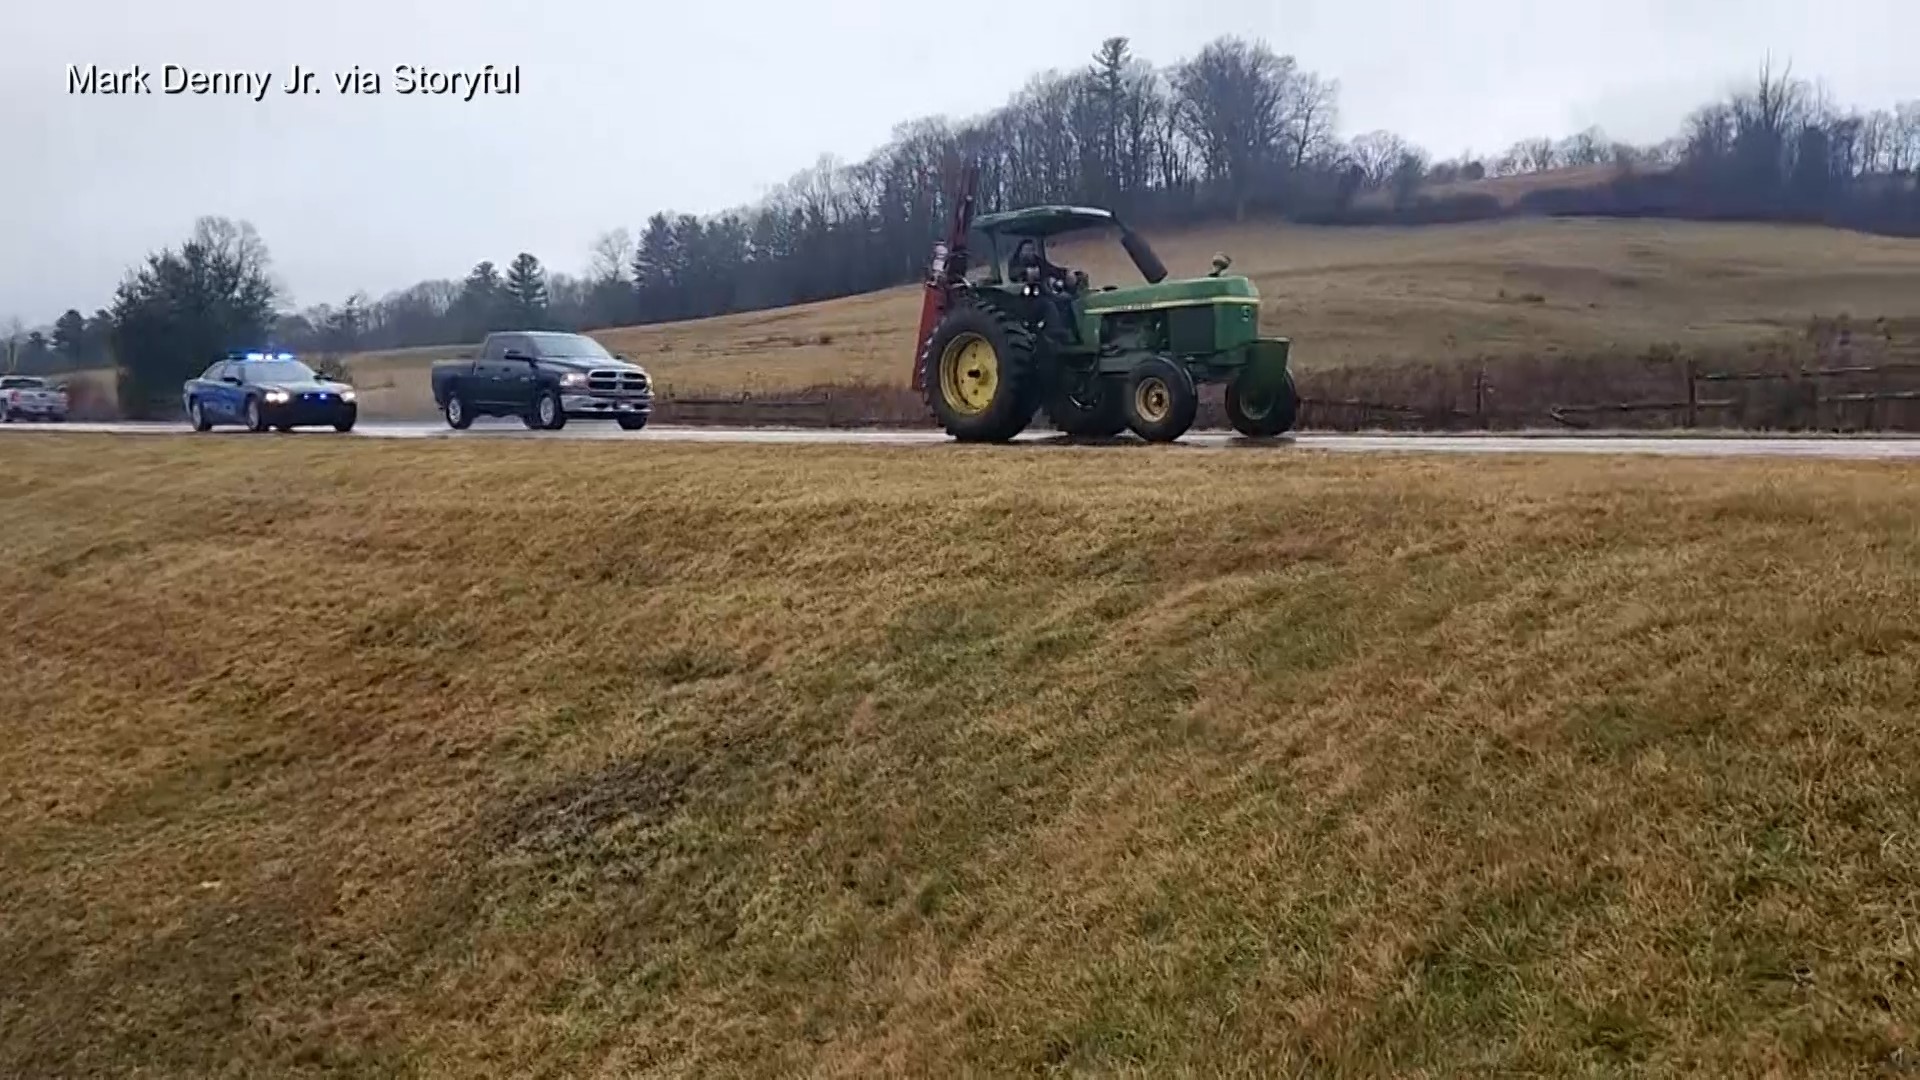 Boone Police were led in a slow-speed chase by a man driving a John Deere tractor trying to strike pedestrians and cars near 1636 US Highway 421 South.